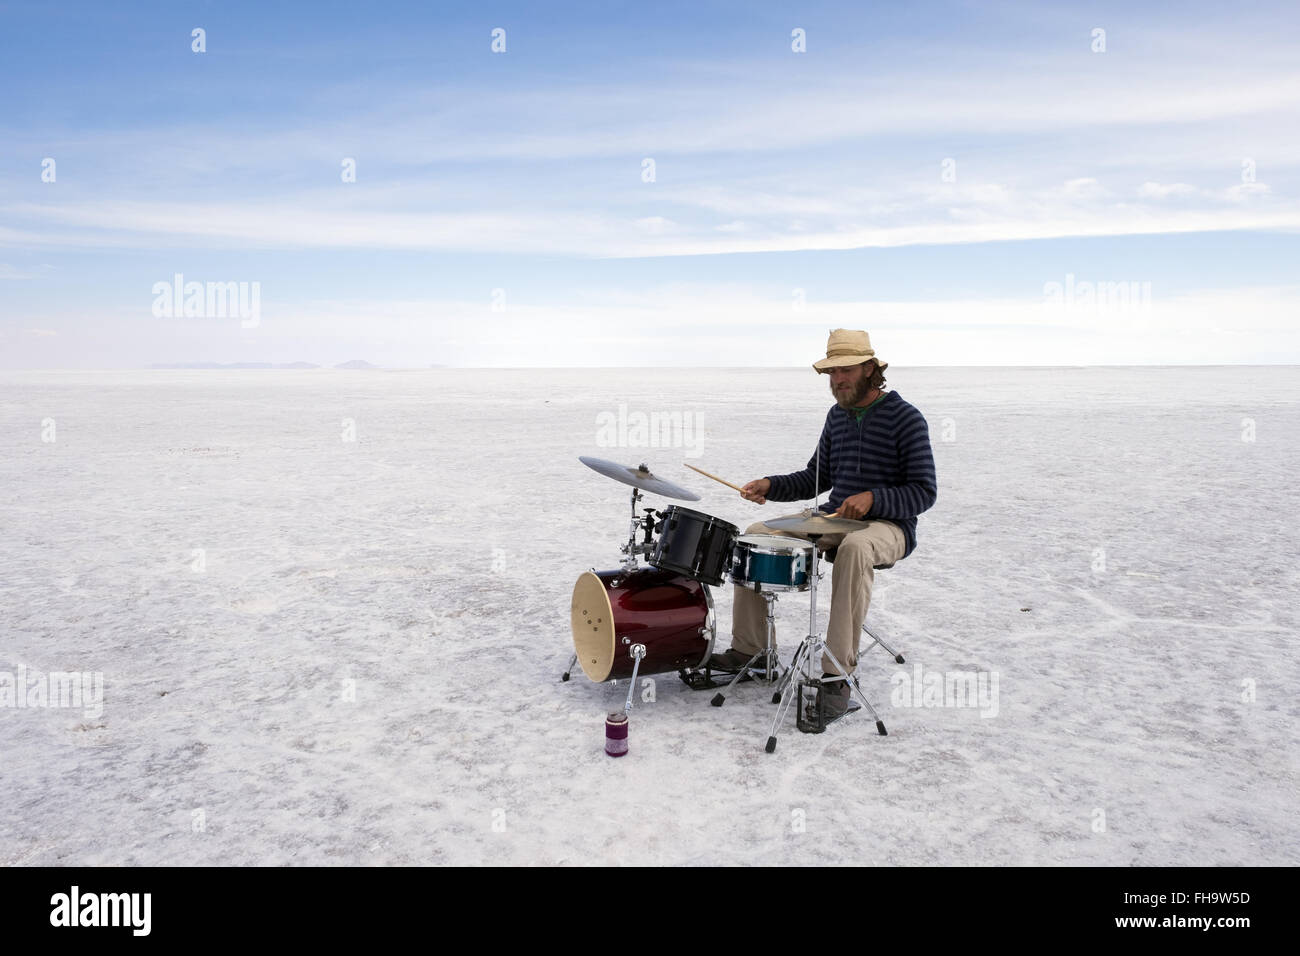 A musician plays the drums in the landscape of the Uyuni Salt Flats Stock Photo